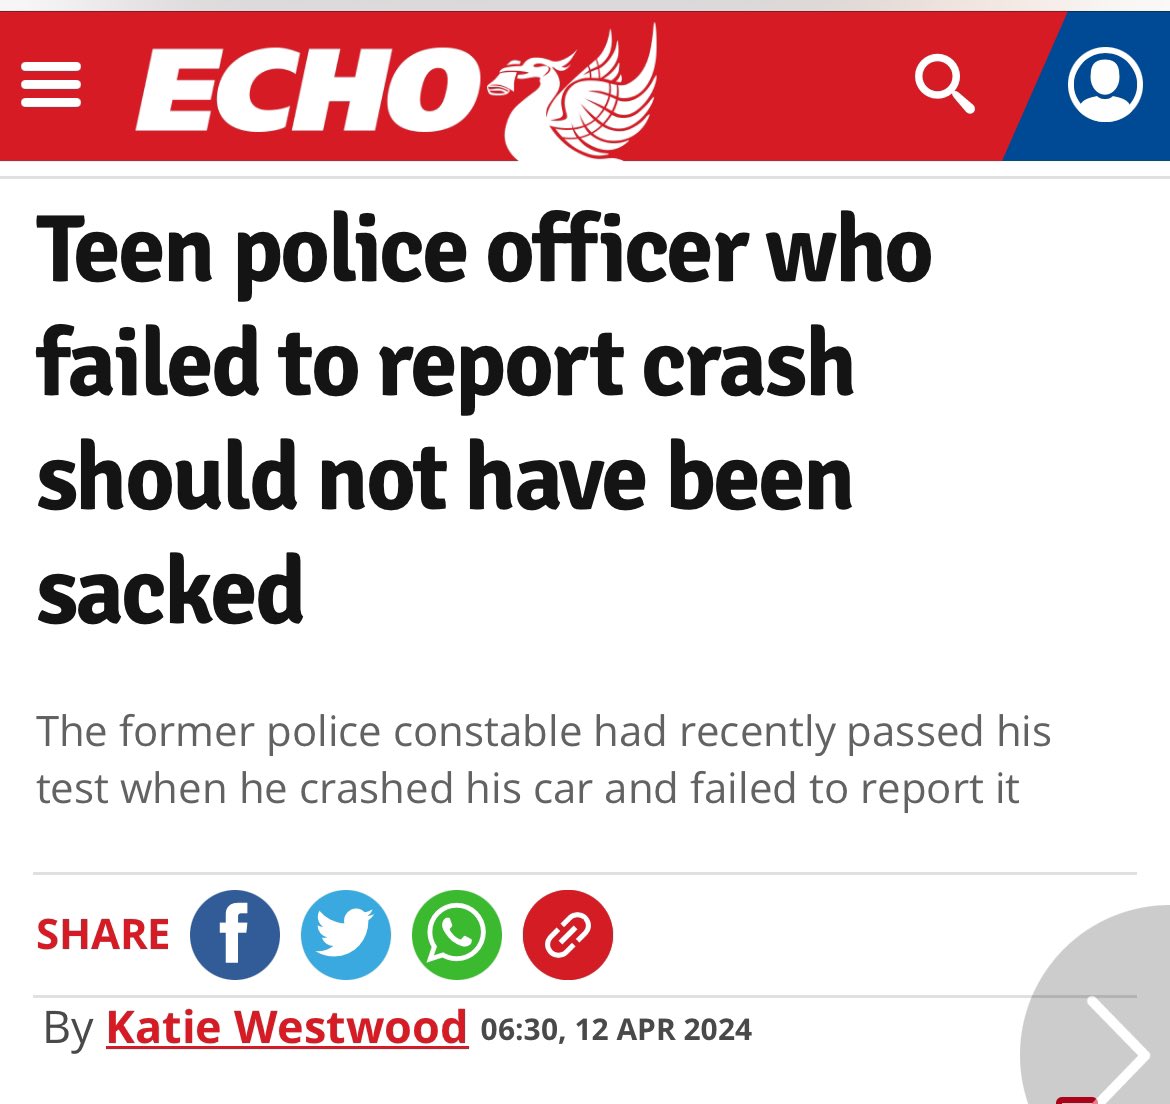 A teenage Police Officer who was sacked for failing to report a car crash has had his dismissal overturned on appeal. Former Police Constable James Potter crashed his grey Ford Focus into a parked Citroen CI in the car park of Merseyside Police Training Academy in Allerton on…